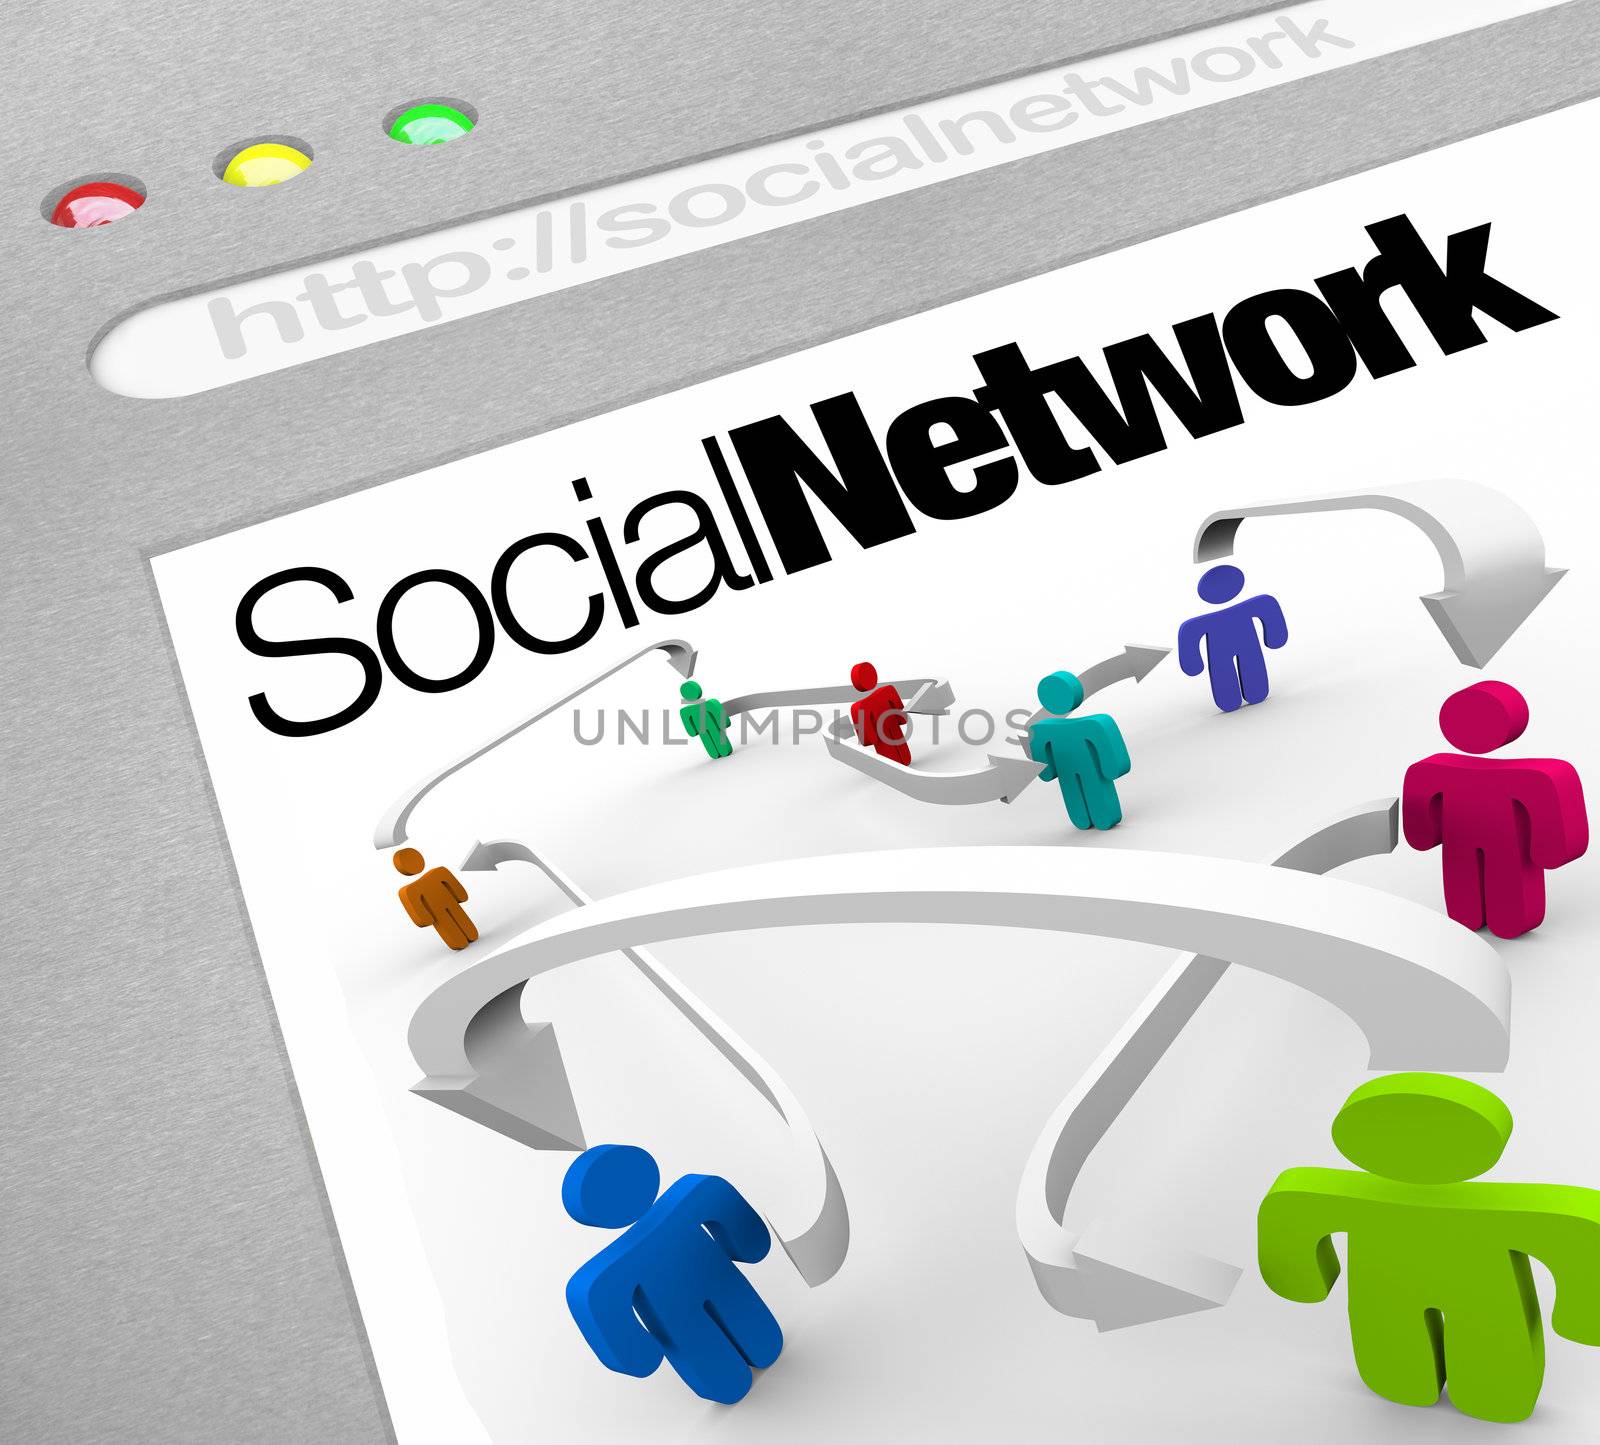 A web browser window shows a social network of people connected by arrows represented on a web screen illustrating a networking site on the internet